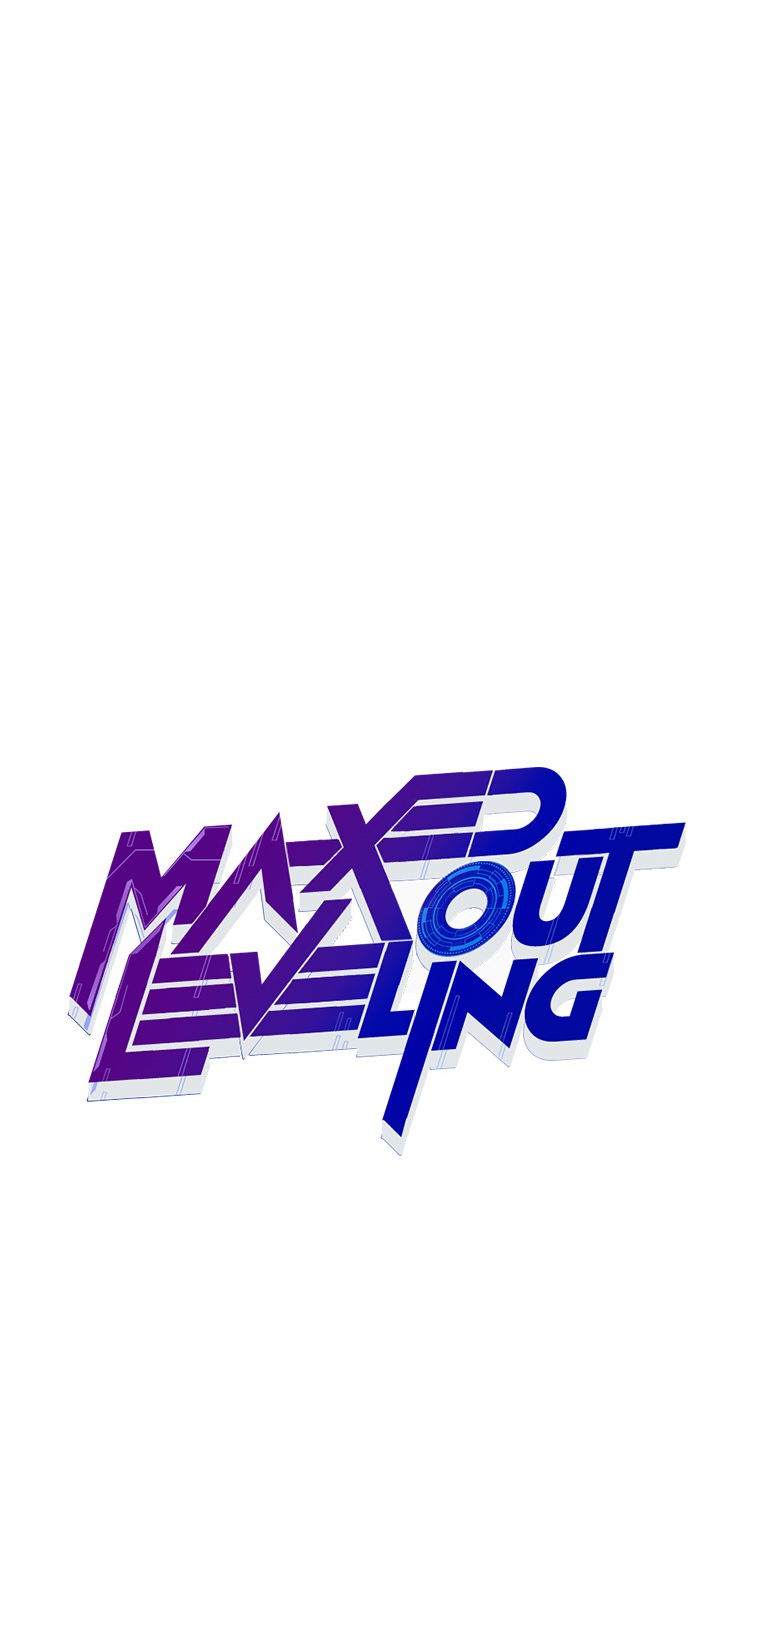 Maxed Out Leveling7 (4)